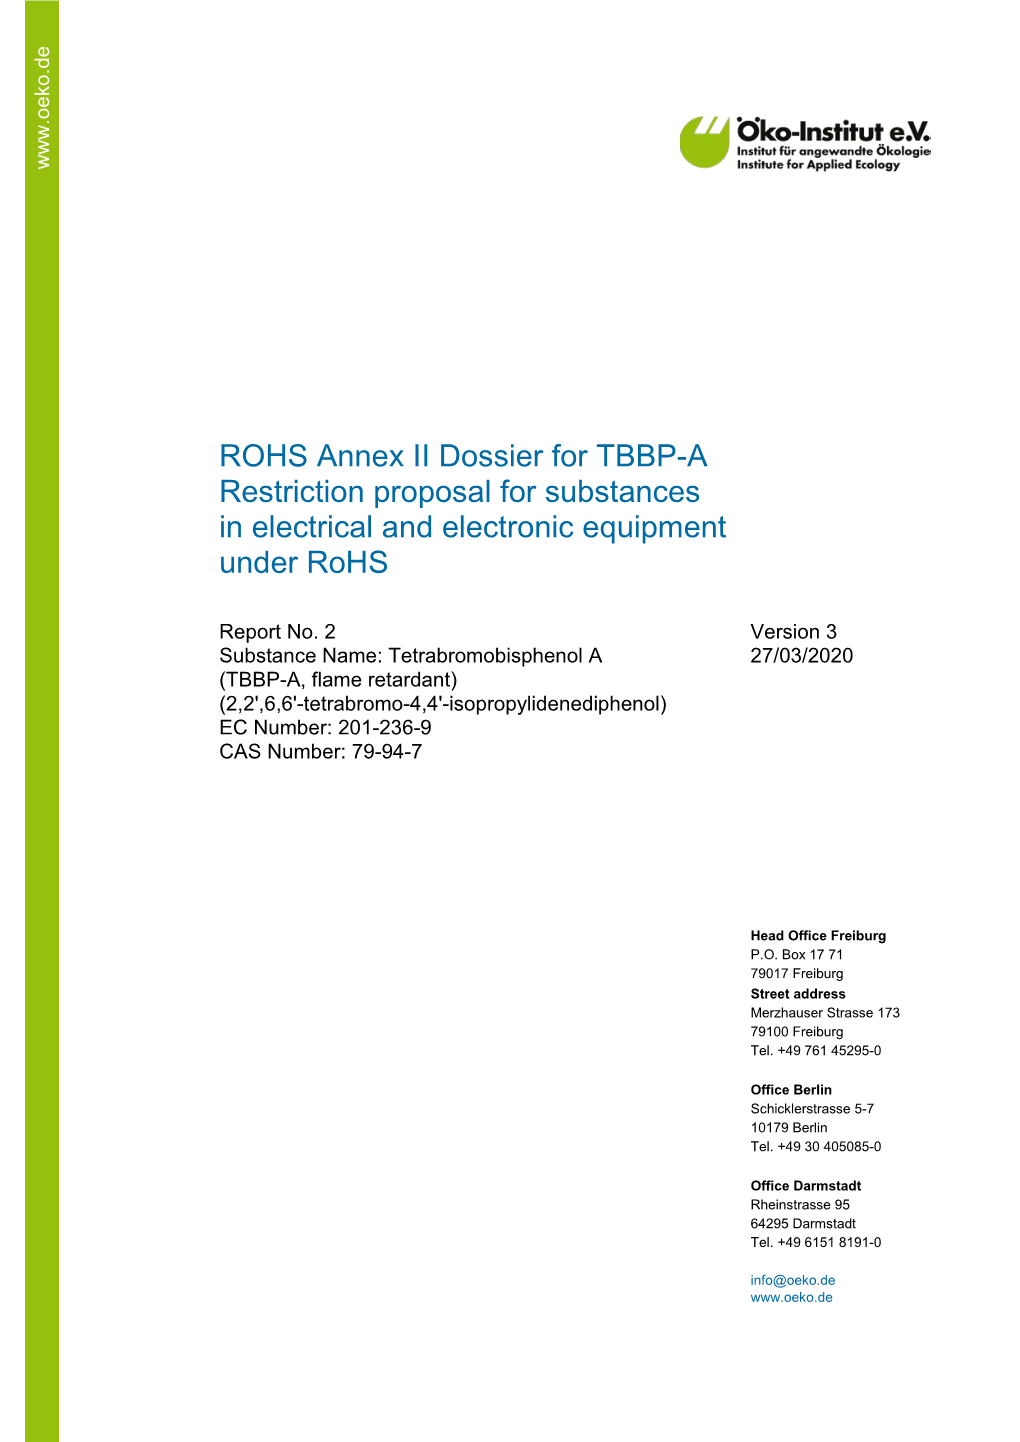 ROHS Annex II Dossier for TBBP-A Restriction Proposal for Substances in Electrical and Electronic Equipment Under Rohs